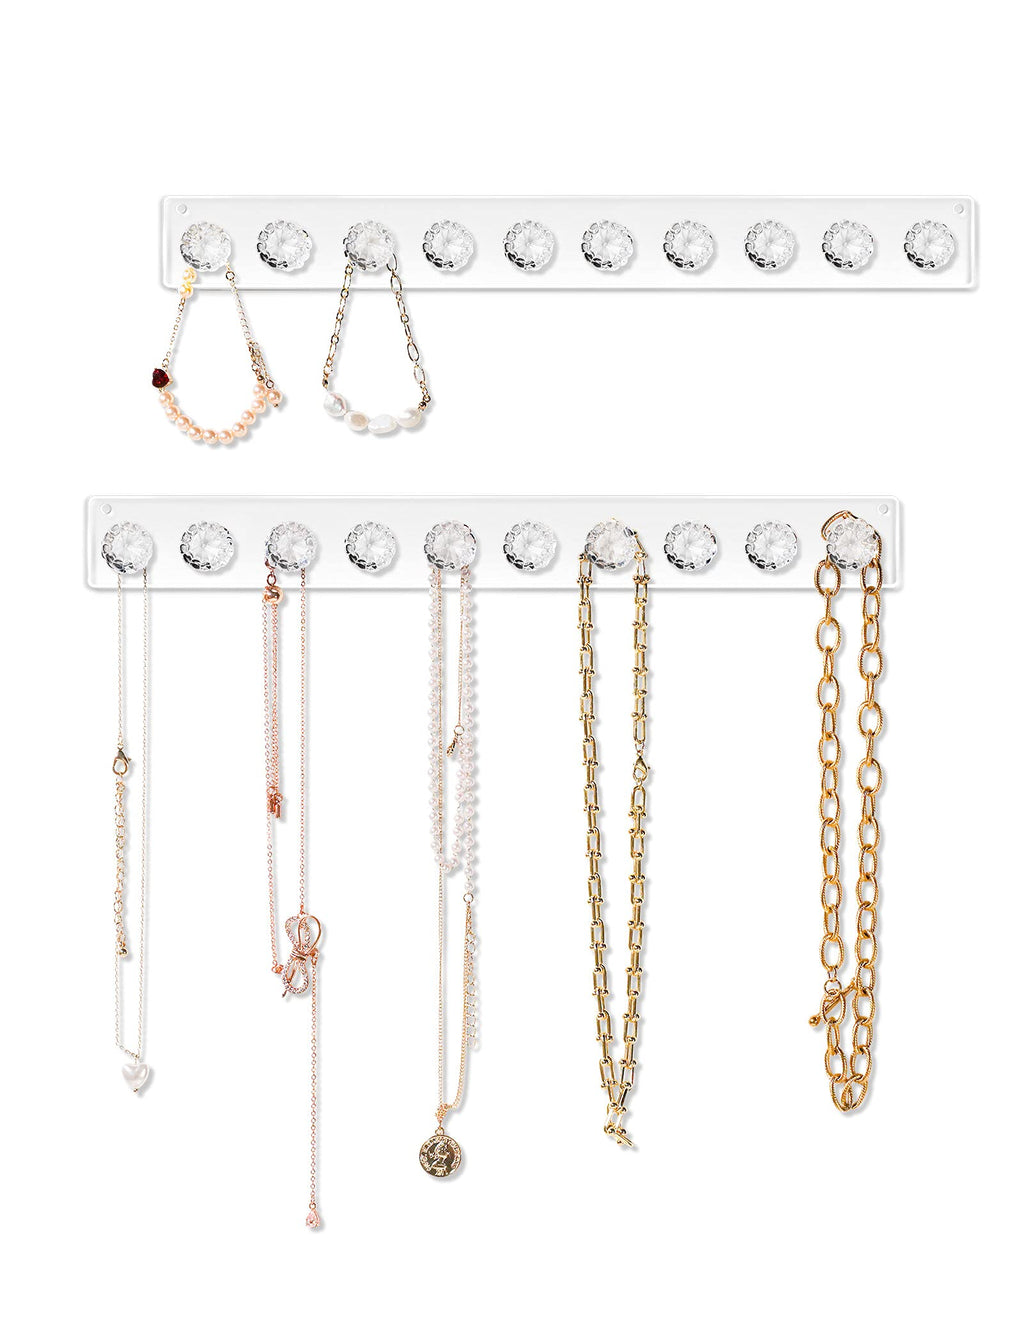 [Australia] - Zreal Jewelry Hanger, 2-pack Acrylic Necklace Holder, Wall Mount Necklace Hanger Organizer with 10 Jewelry Hooks in Pumpkin Shape (Clear) Clear 